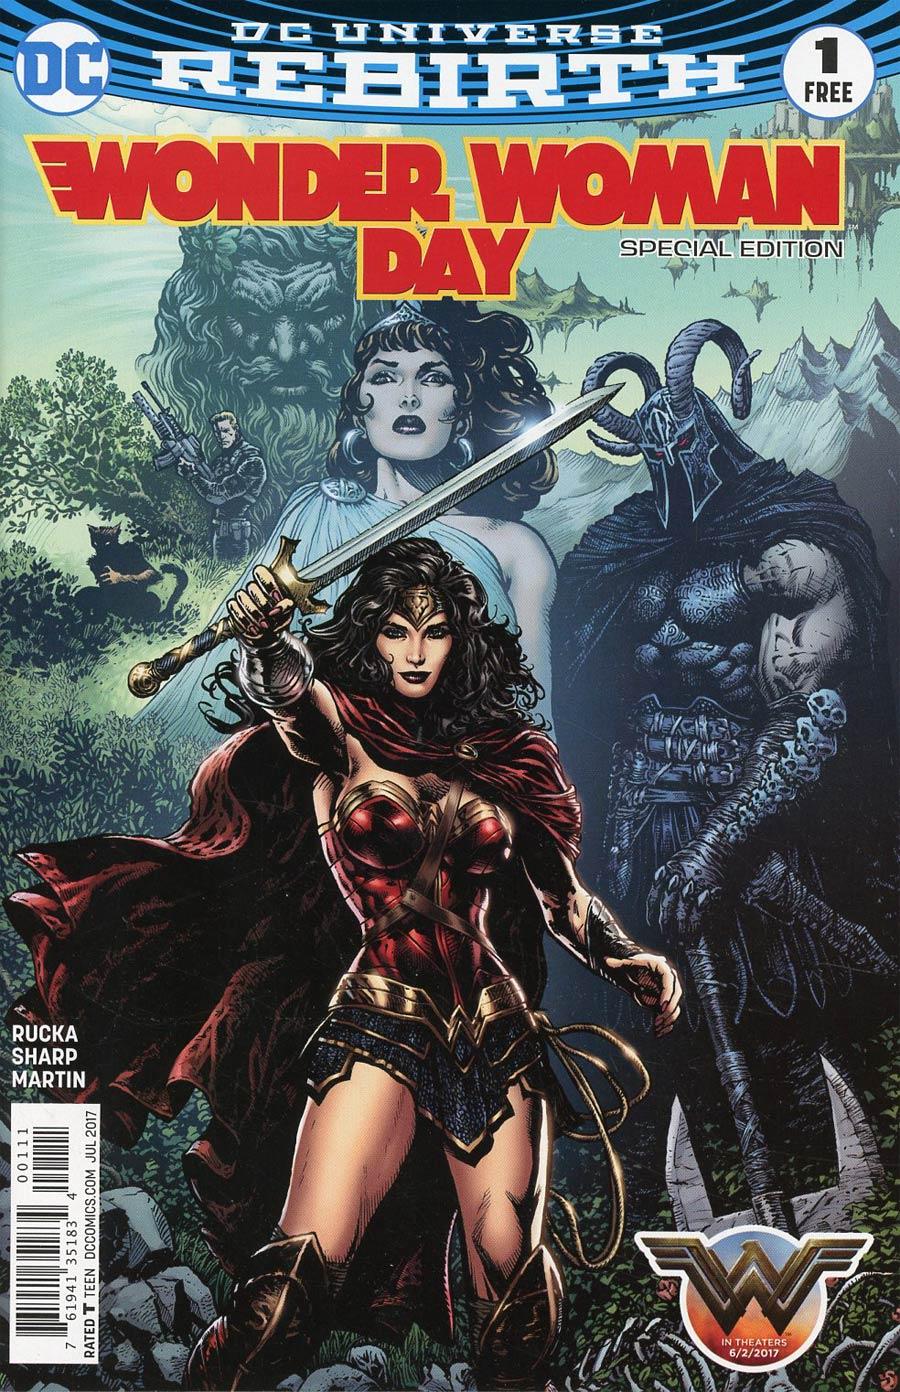 Wonder Woman Day Special Edition Vol. 1 #1